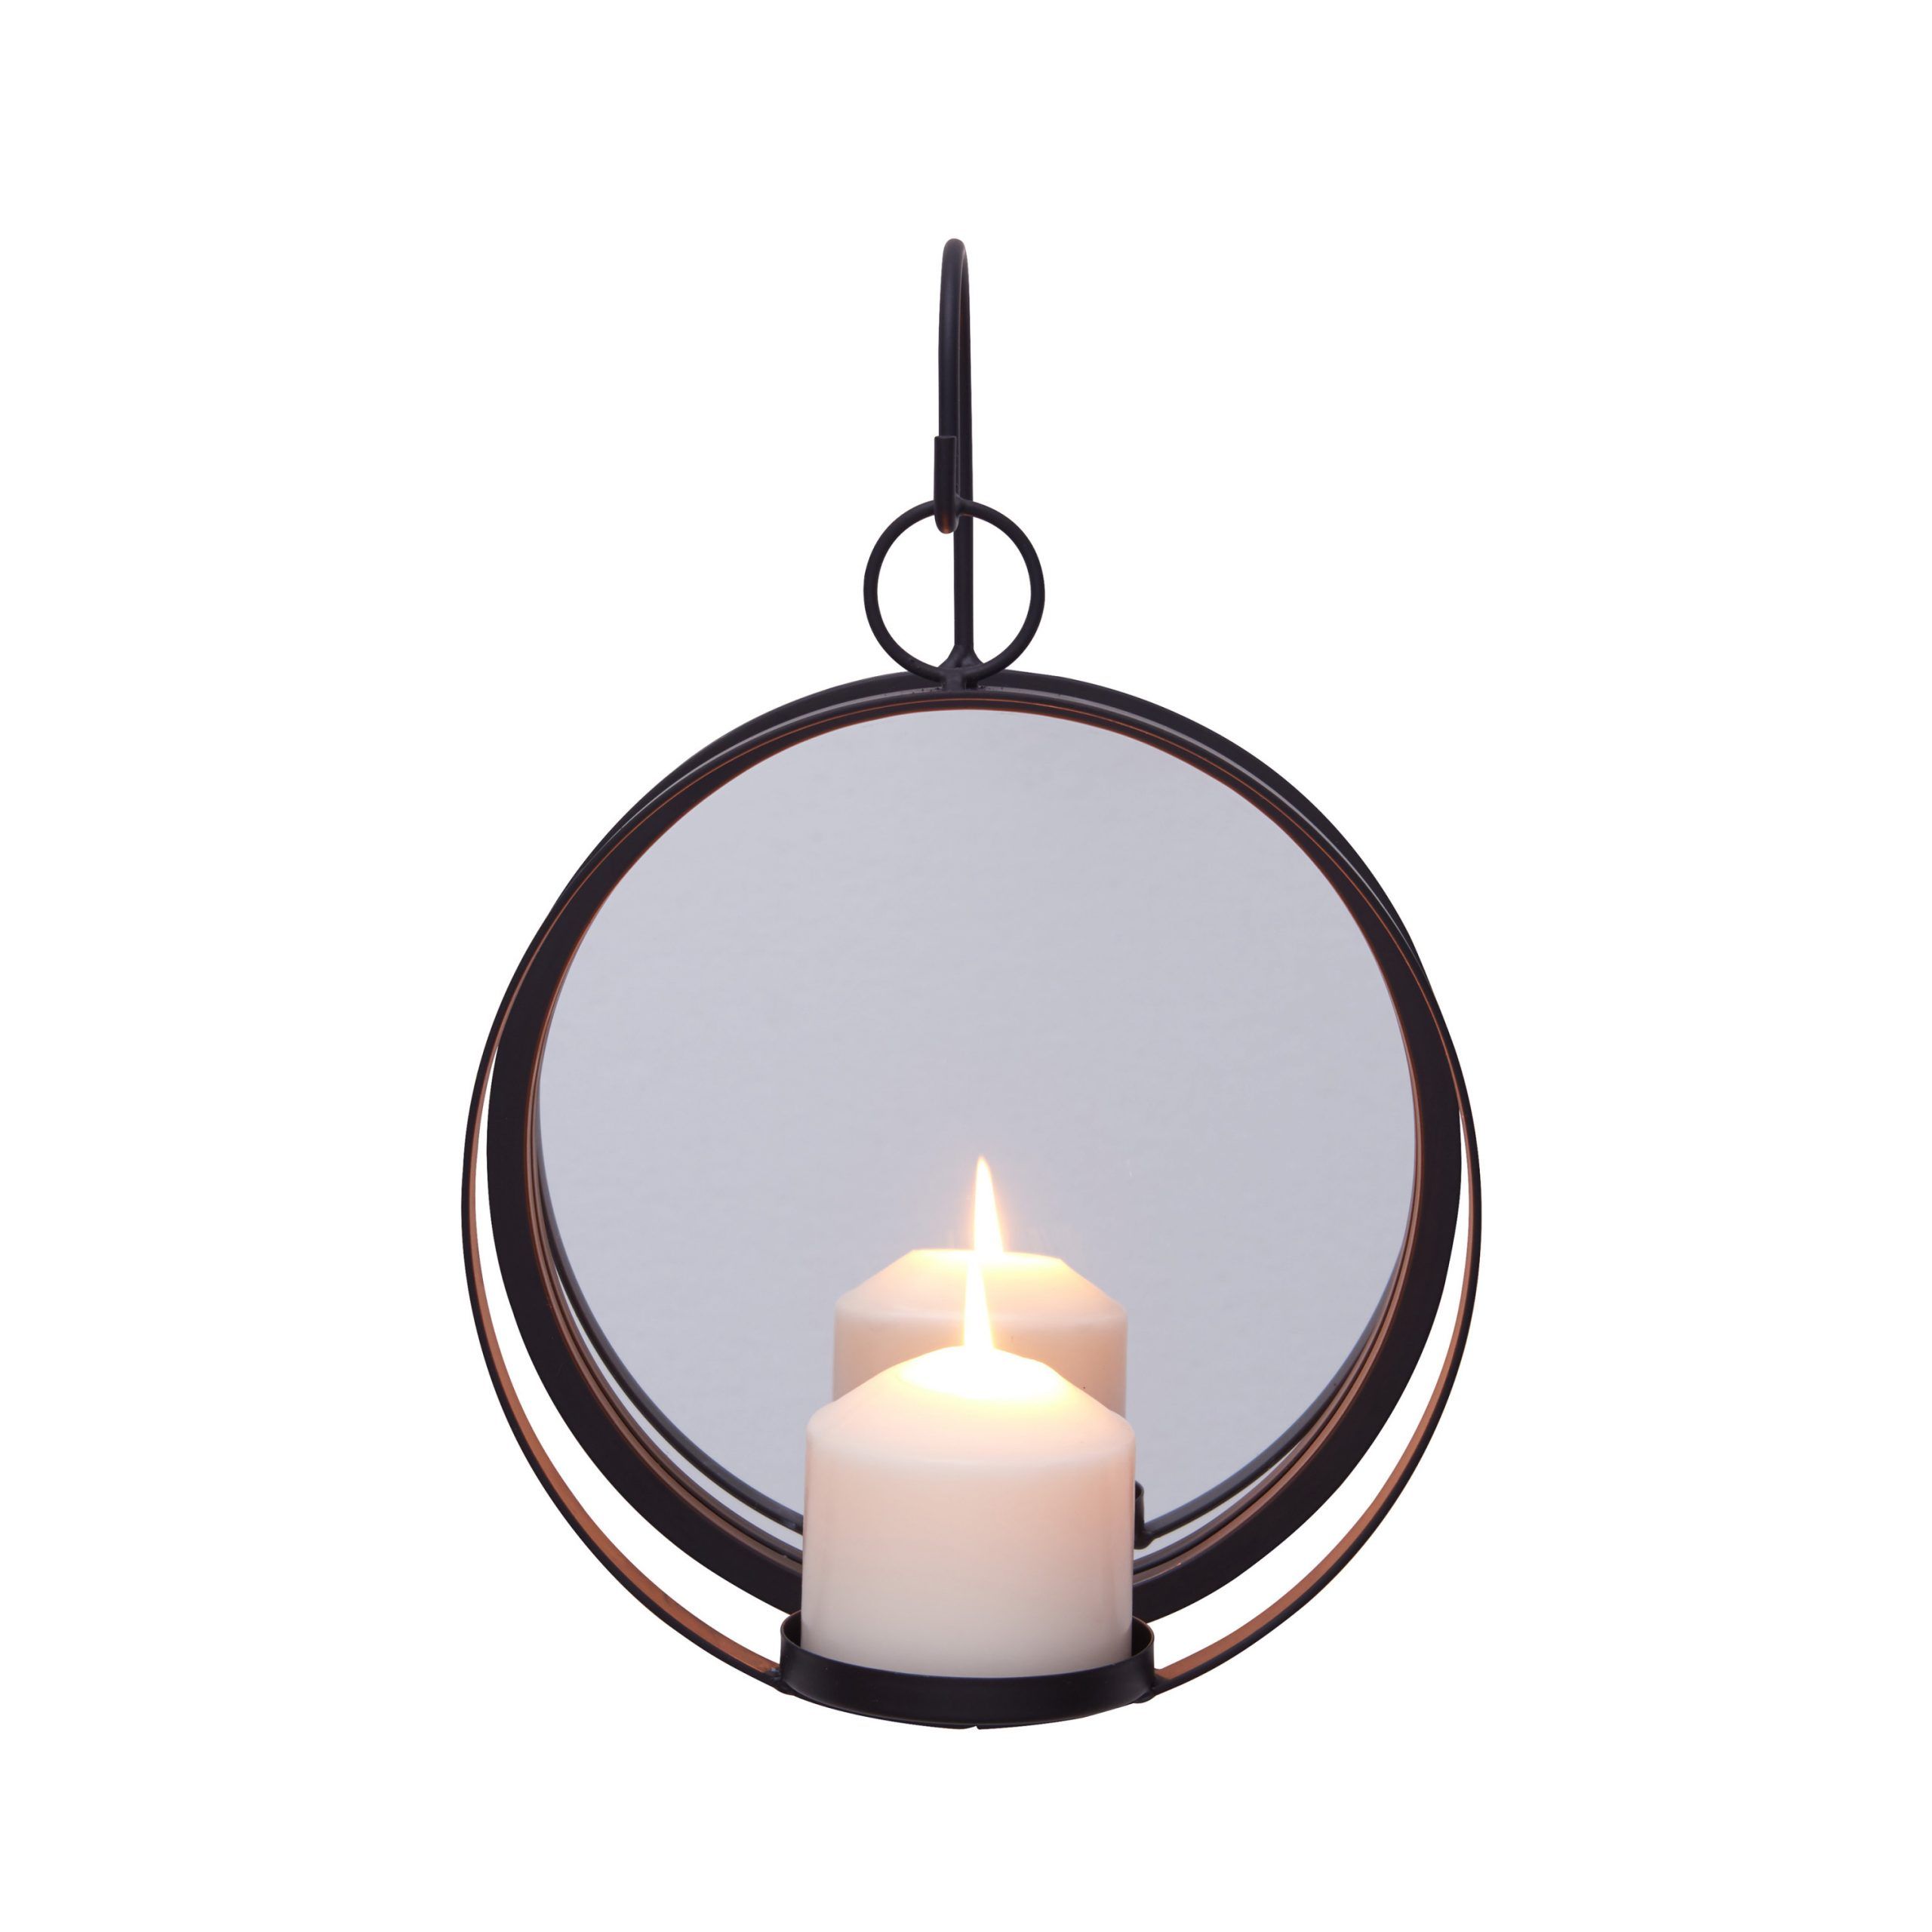 Danya B. Round Wrought Iron Pillar Candle Sconce With Mirror ? Rustic Inside Rustic Black Round Oversized Mirrors (Photo 12 of 15)